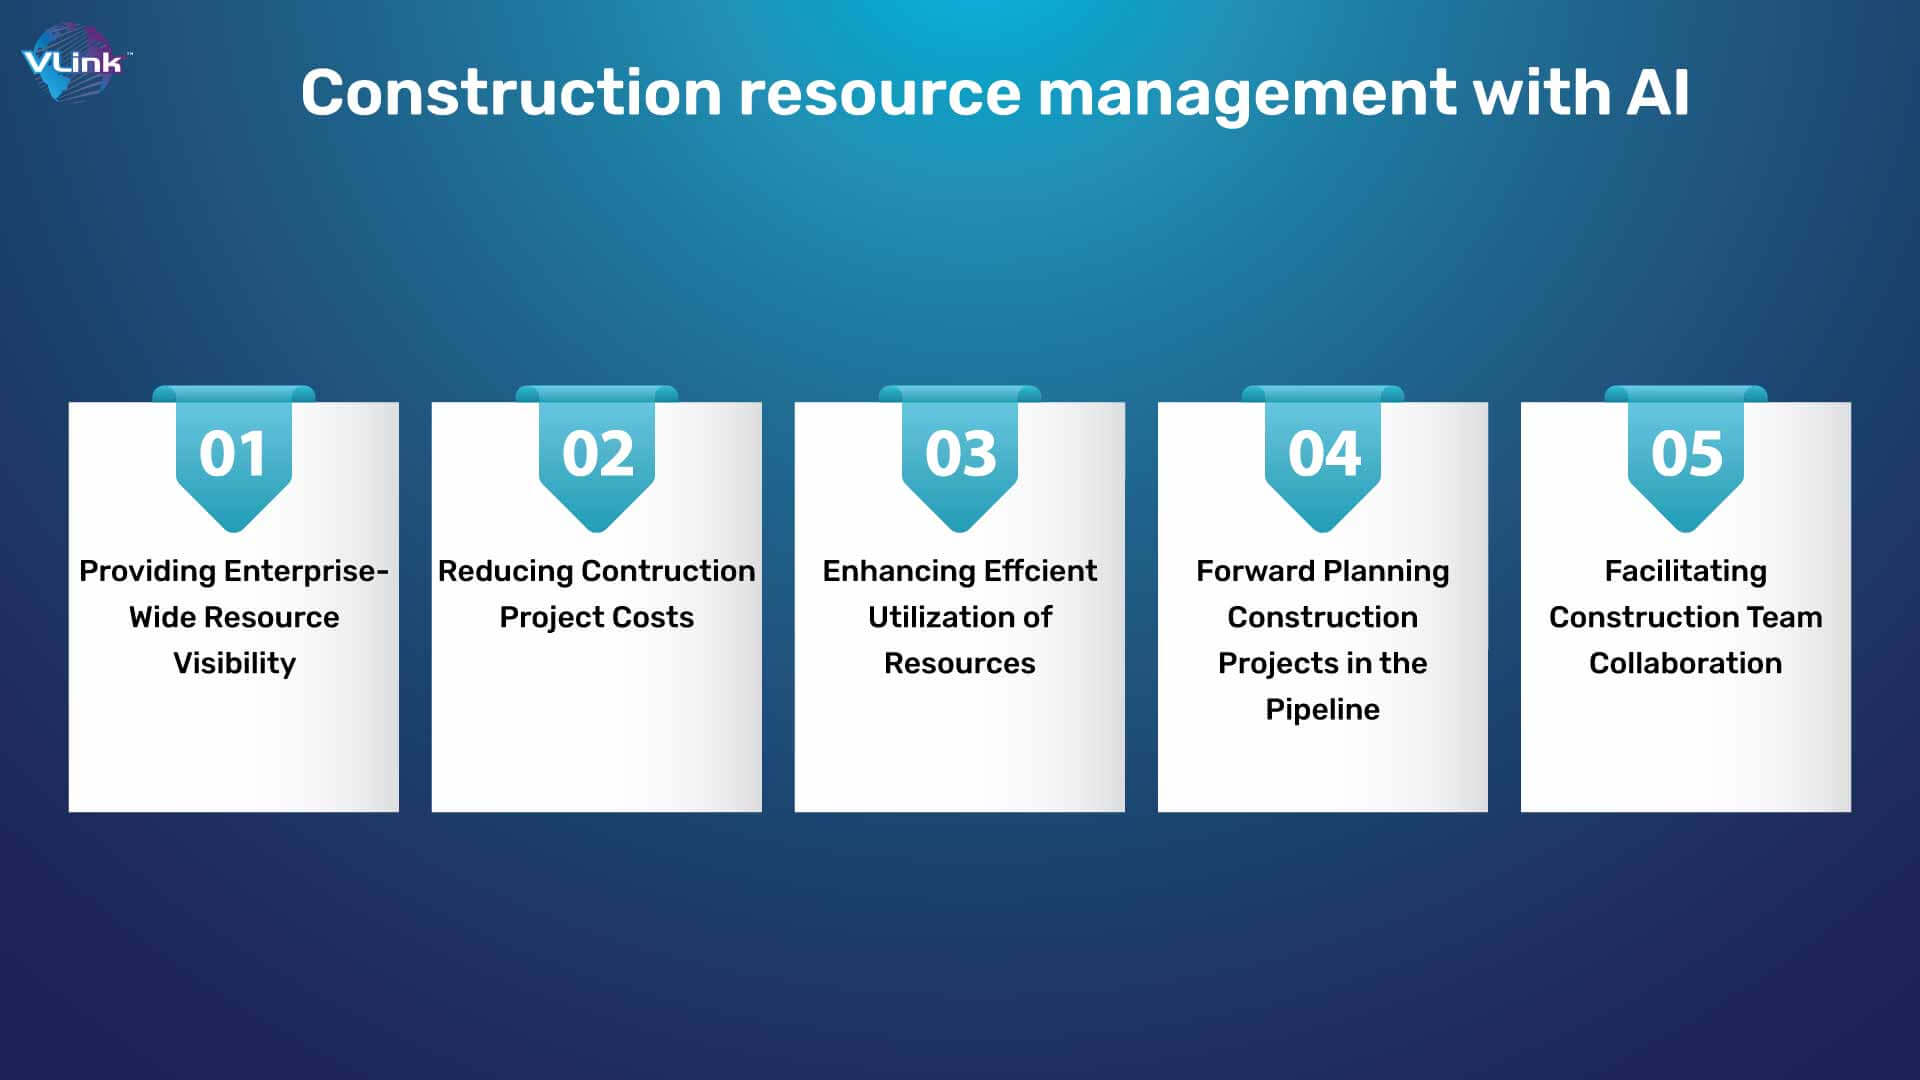 Construction resource management with AI